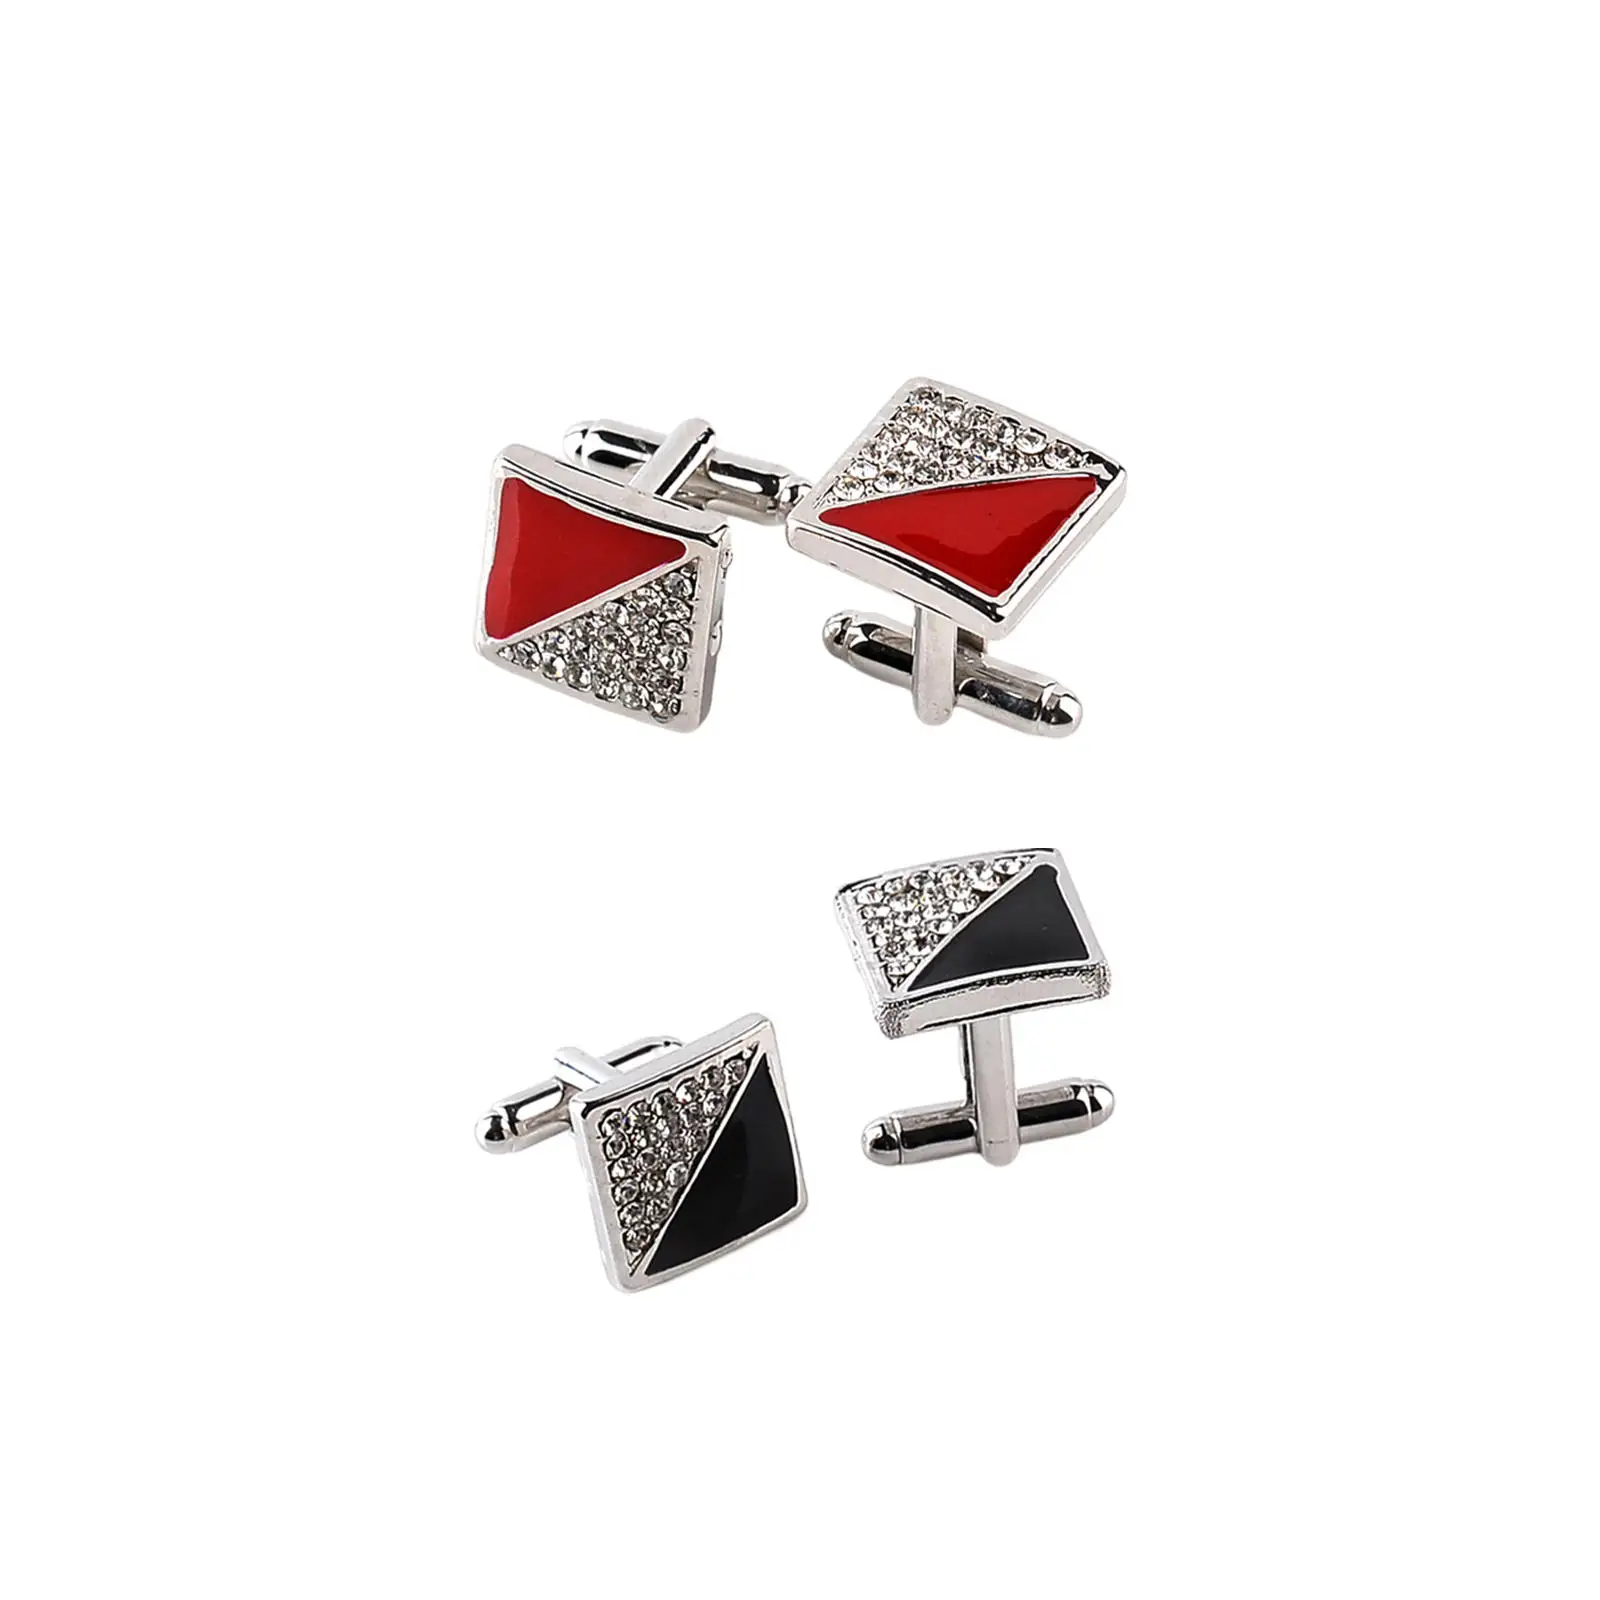 1 Pair Mens Cufflinks Rhinestones Alloy Unique Square Jewelry for Special Occasions Office Proms Favour Gift Suit Accessories